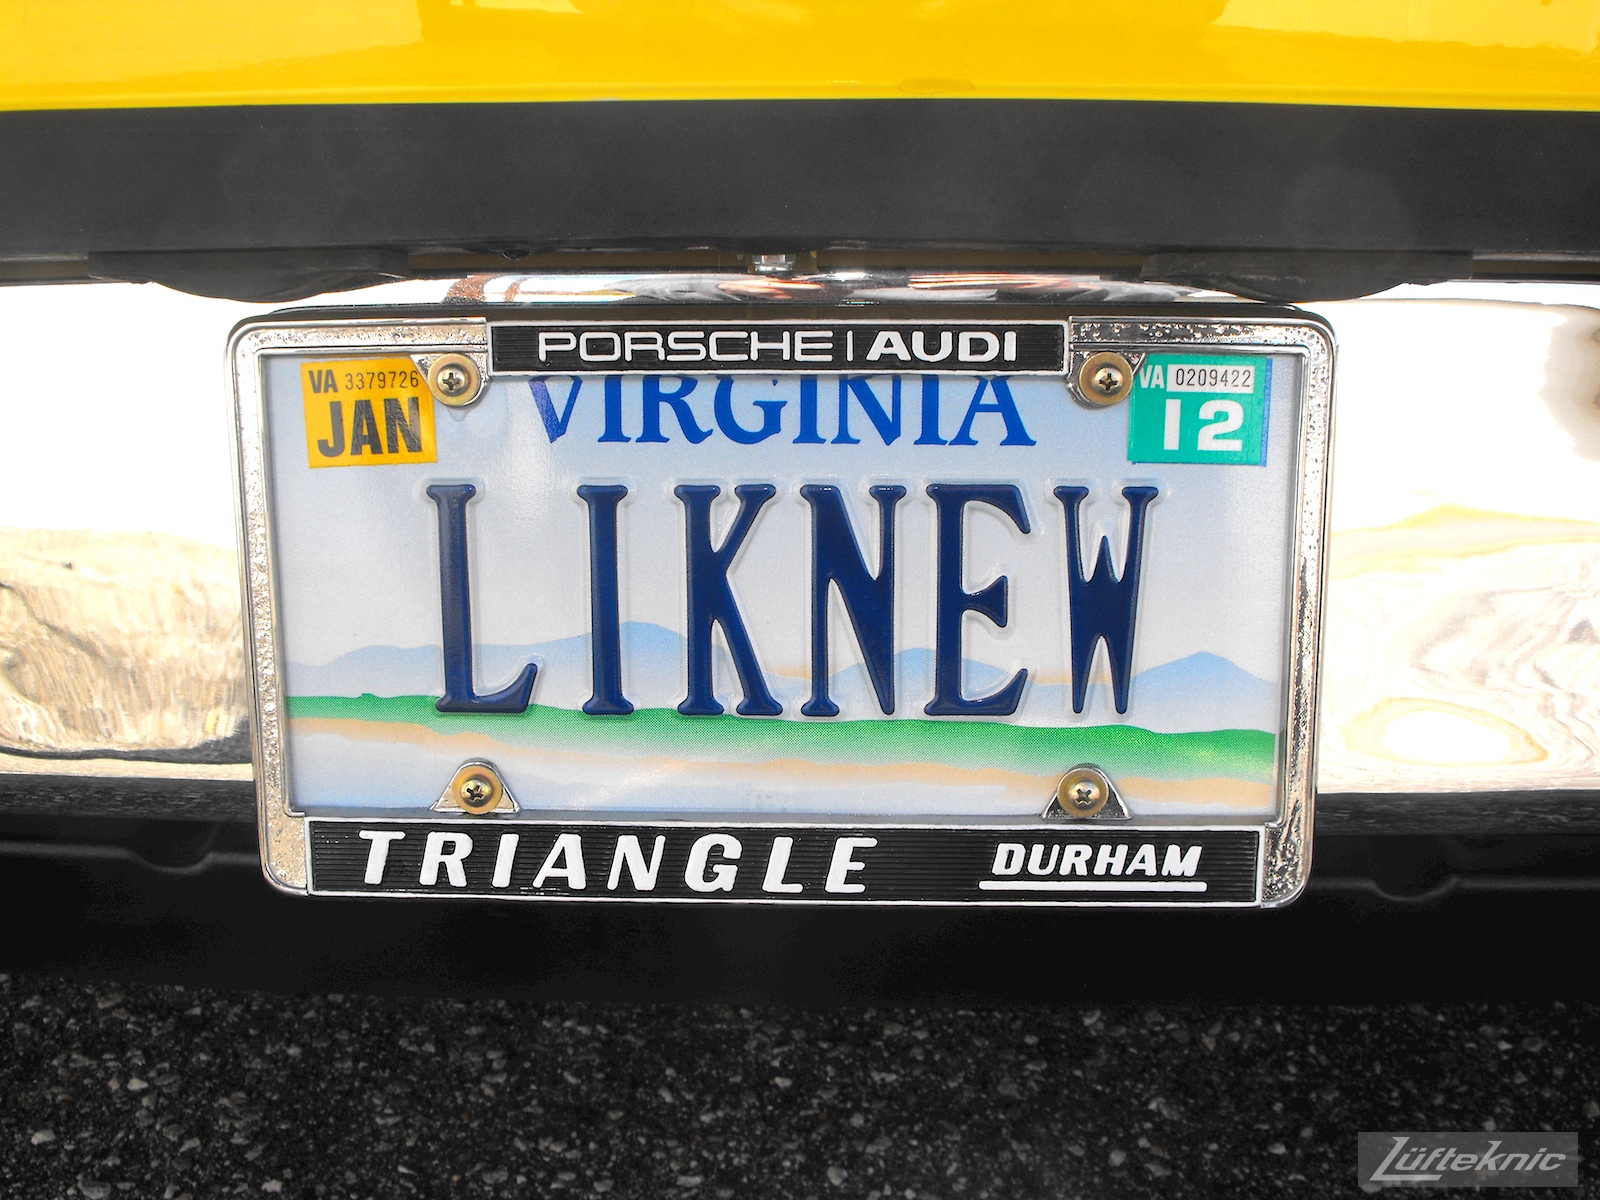 Restored original dealership license plate frame and "LIKENEW" vanity tag on a completely restored yellow Porsche 914 posing in the parking lot of Lufteknic.